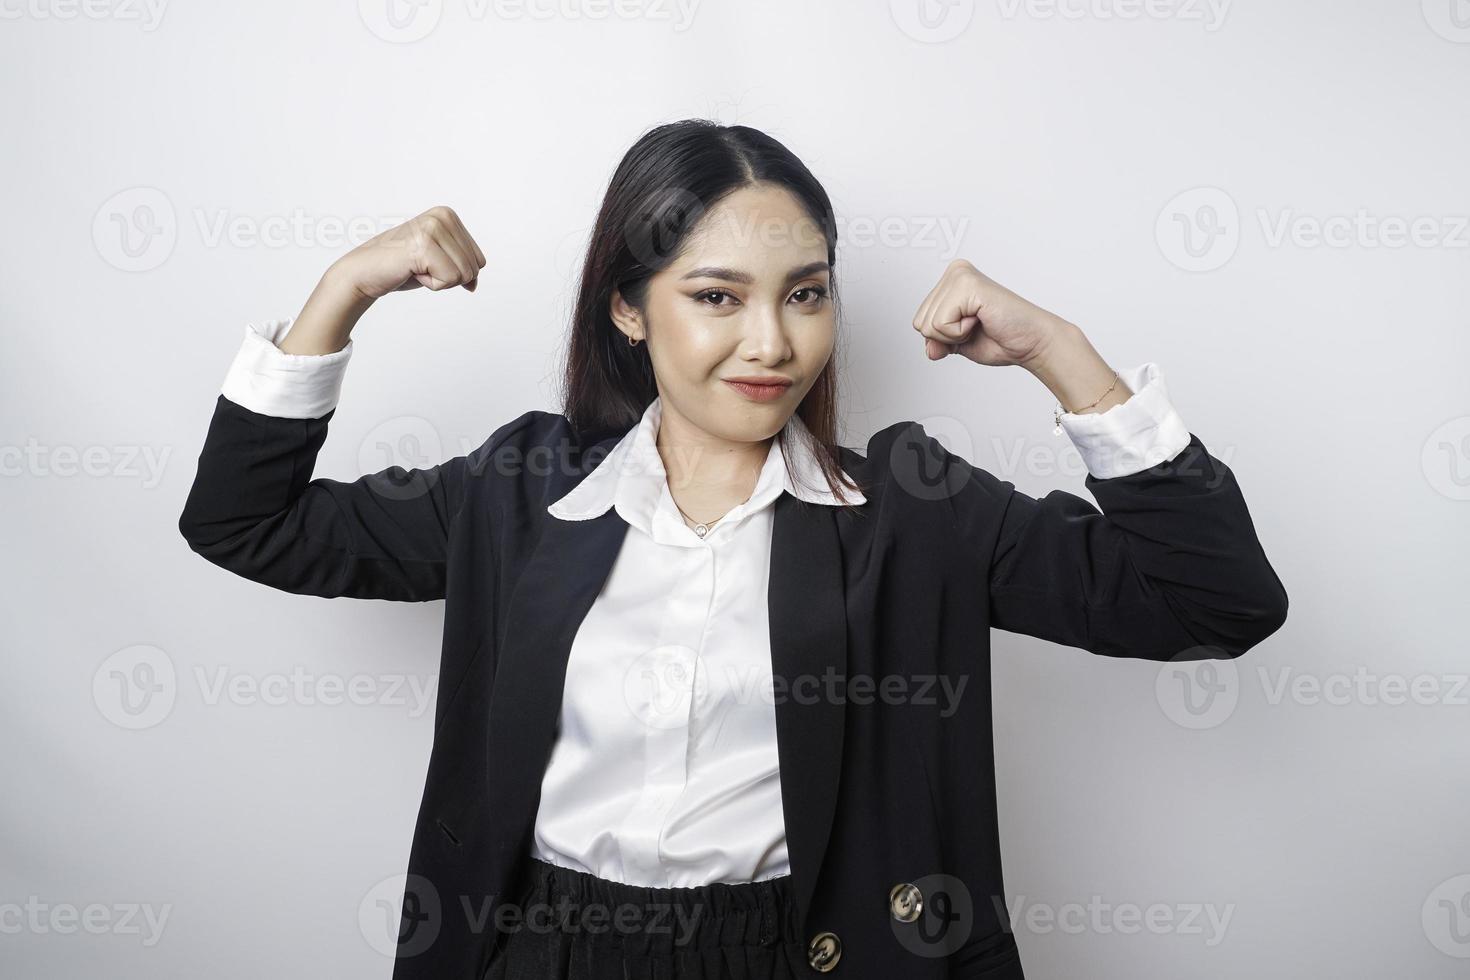 Excited Asian business woman wearing a black suit showing strong gesture by lifting her arms and muscles smiling proudly photo